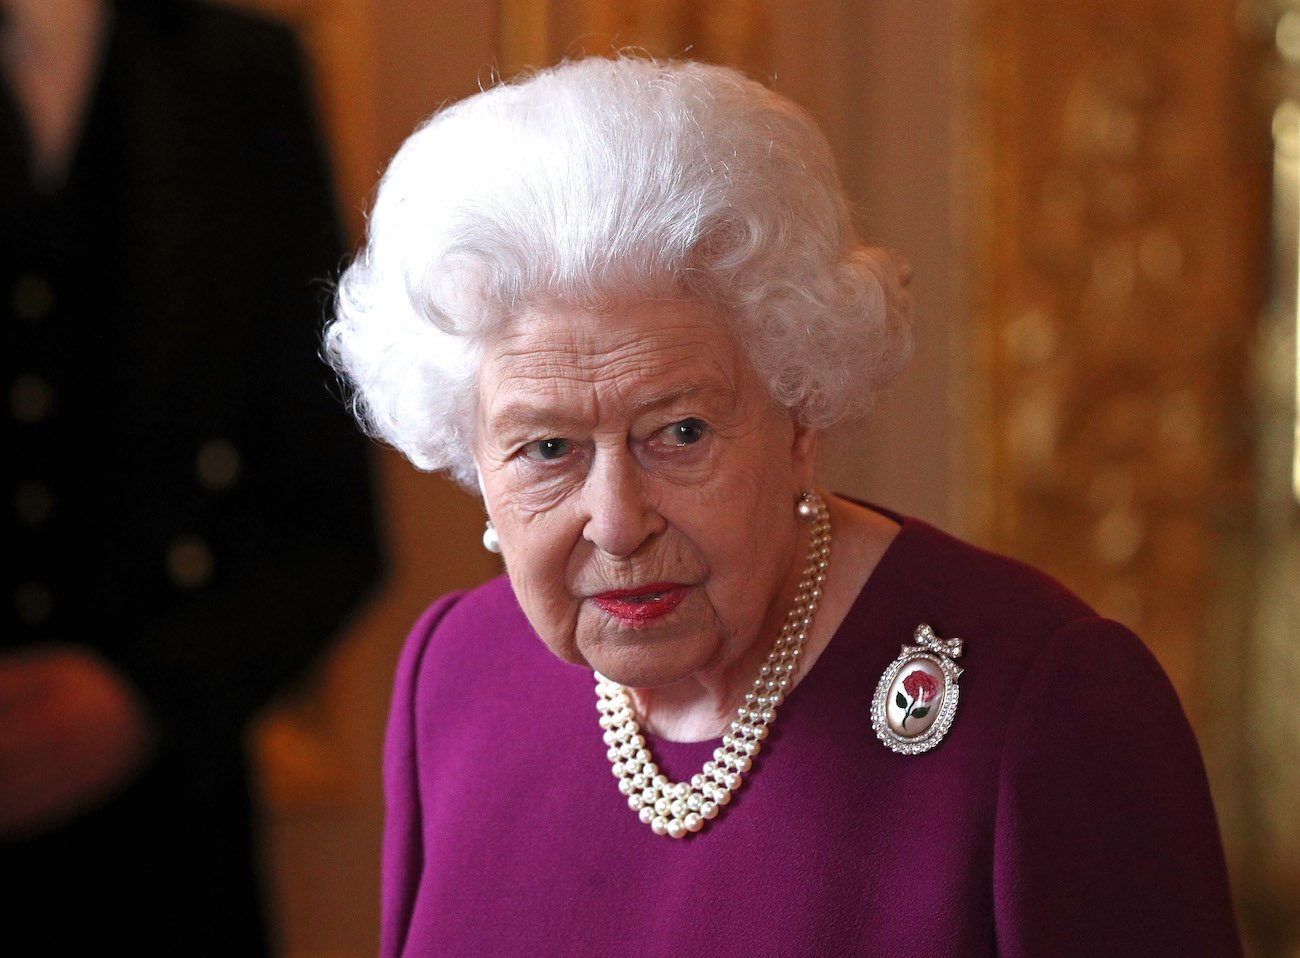 Queen Elizabeth looking on while wearing a magenta outfit